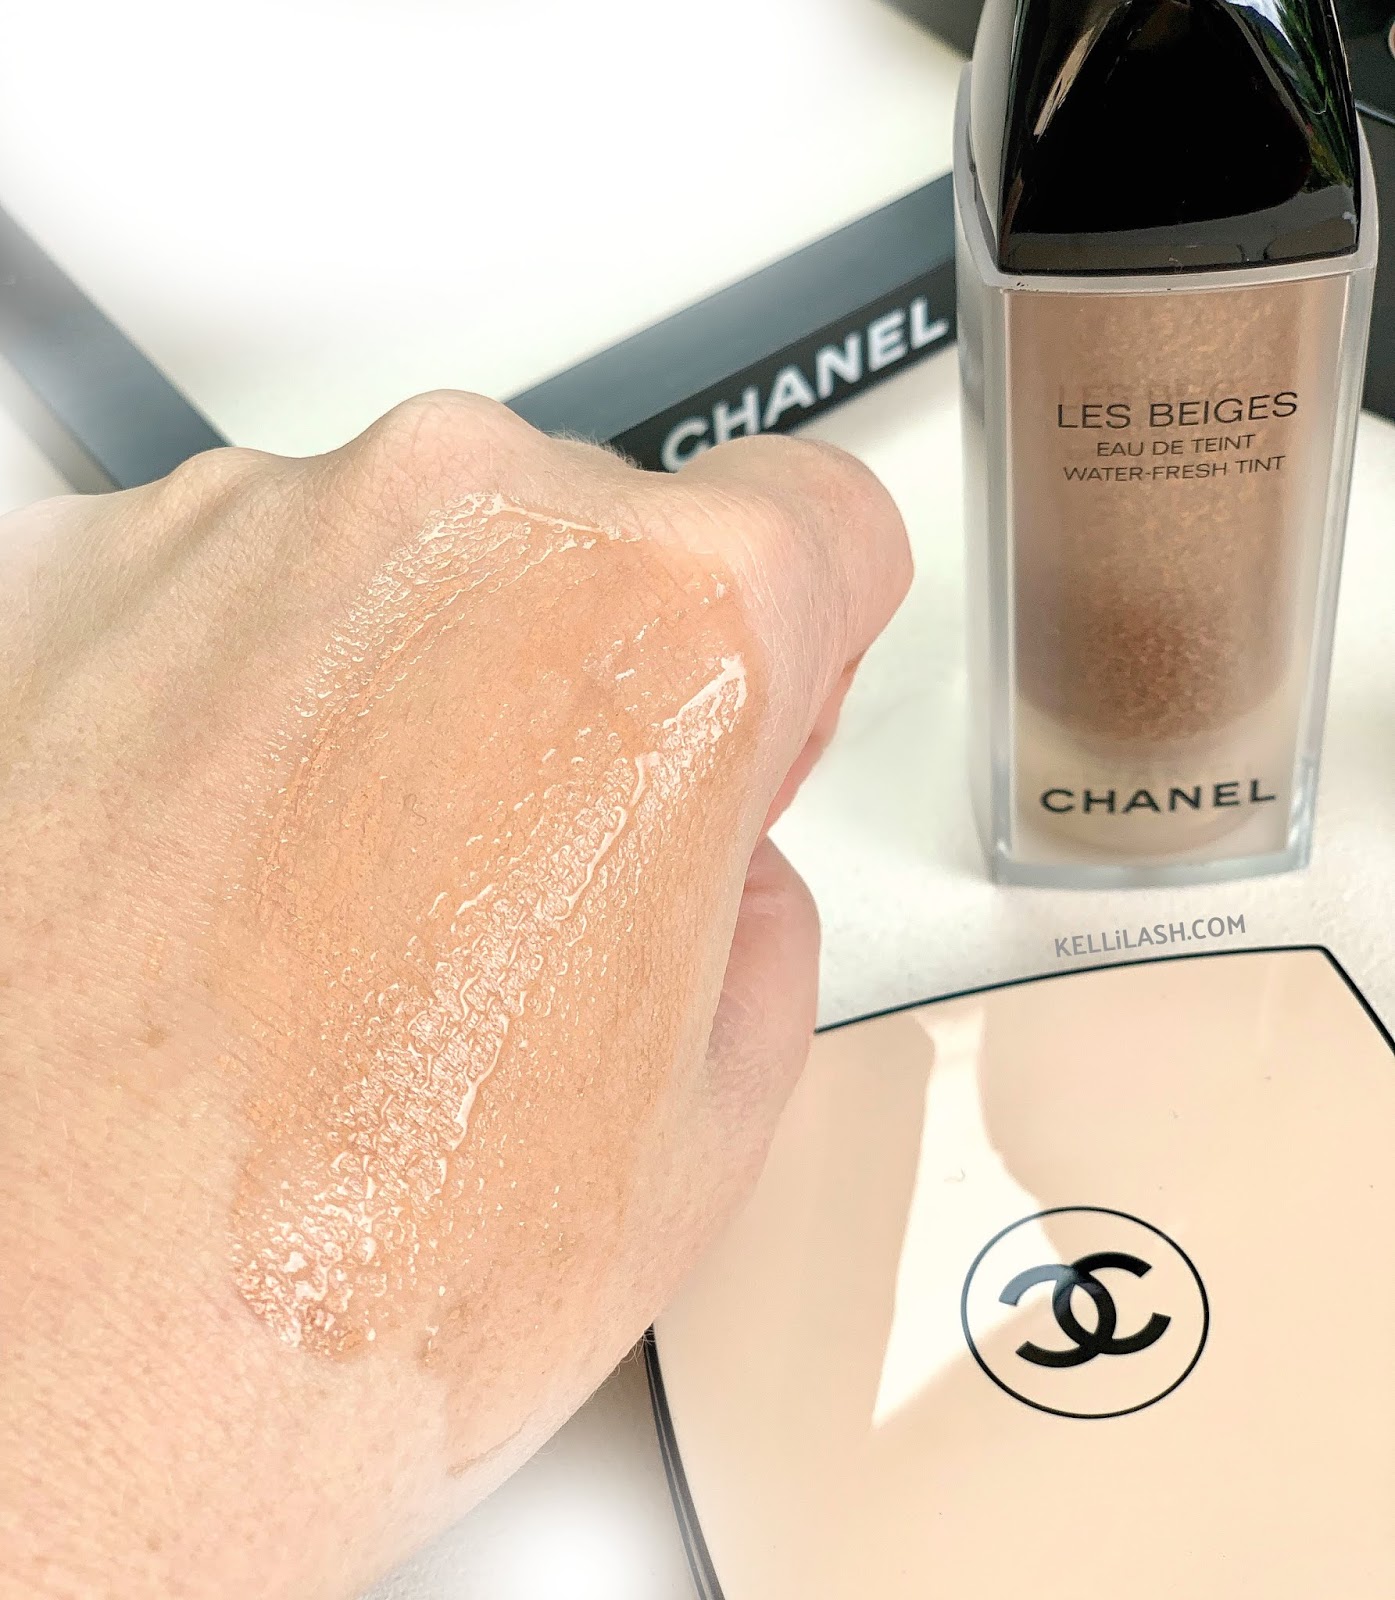 Chanel water fresh tint in Medium . Loving this tint this summer